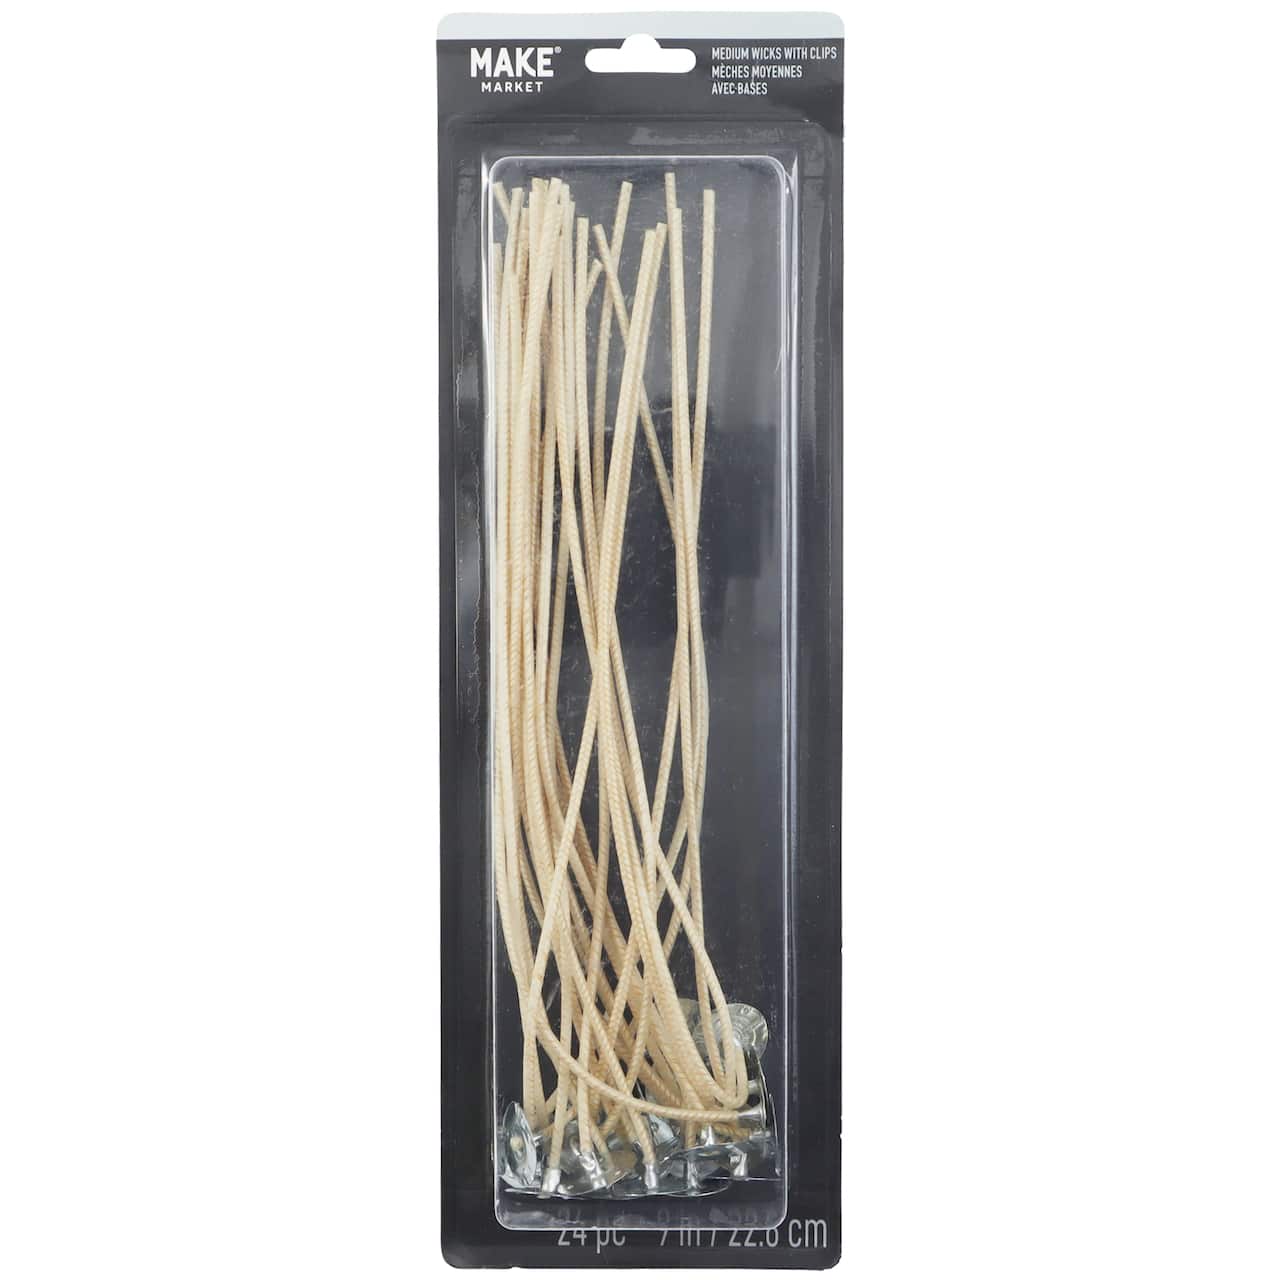 9 Medium Candle Wicks with Clips by Make Market®